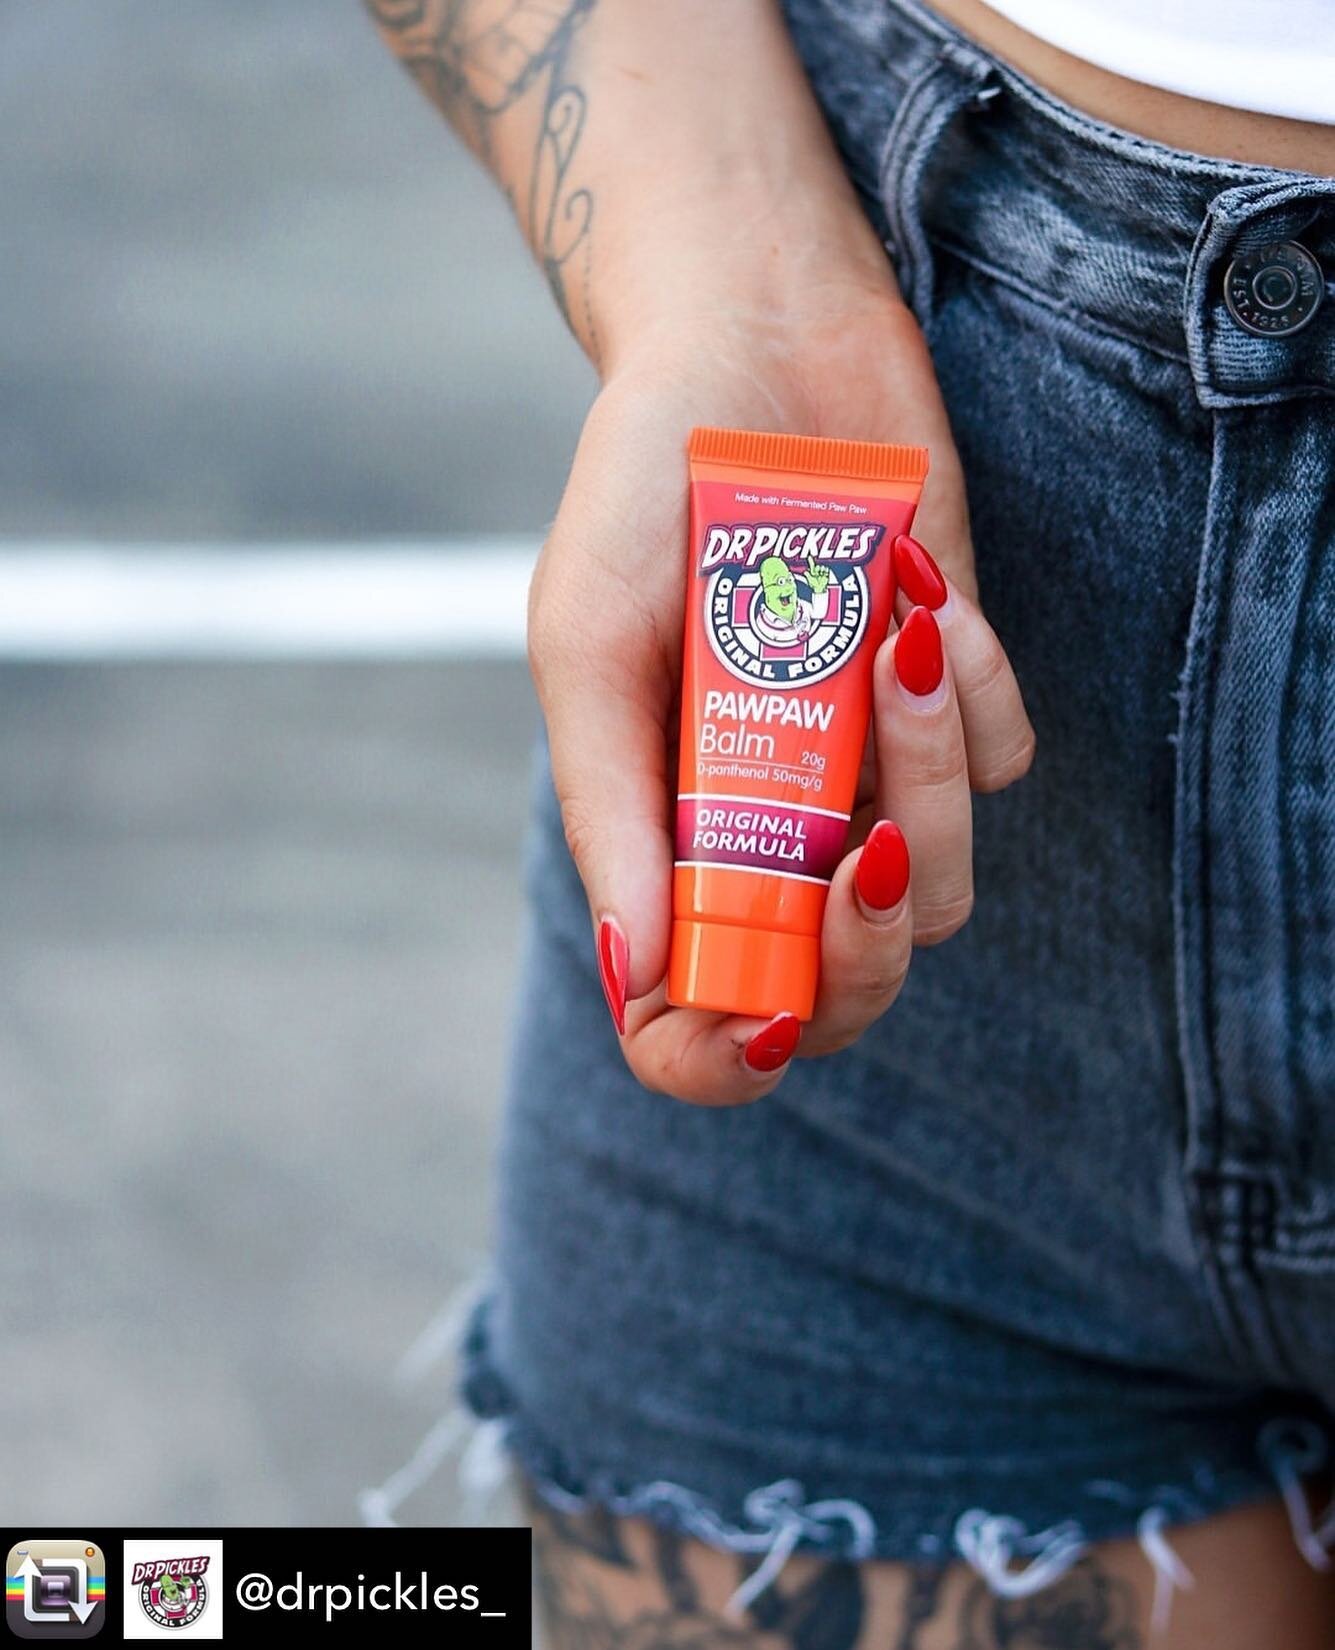 We get asked often what the difference between our Original Tattoo Balm (green tube) and our Original Paw Paw Balm (orange tube) is, and the difference is all in the beeswax!⁠
⁠
Our Paw Paw Balm is the same formula as our Original Tattoo Balm, howeve